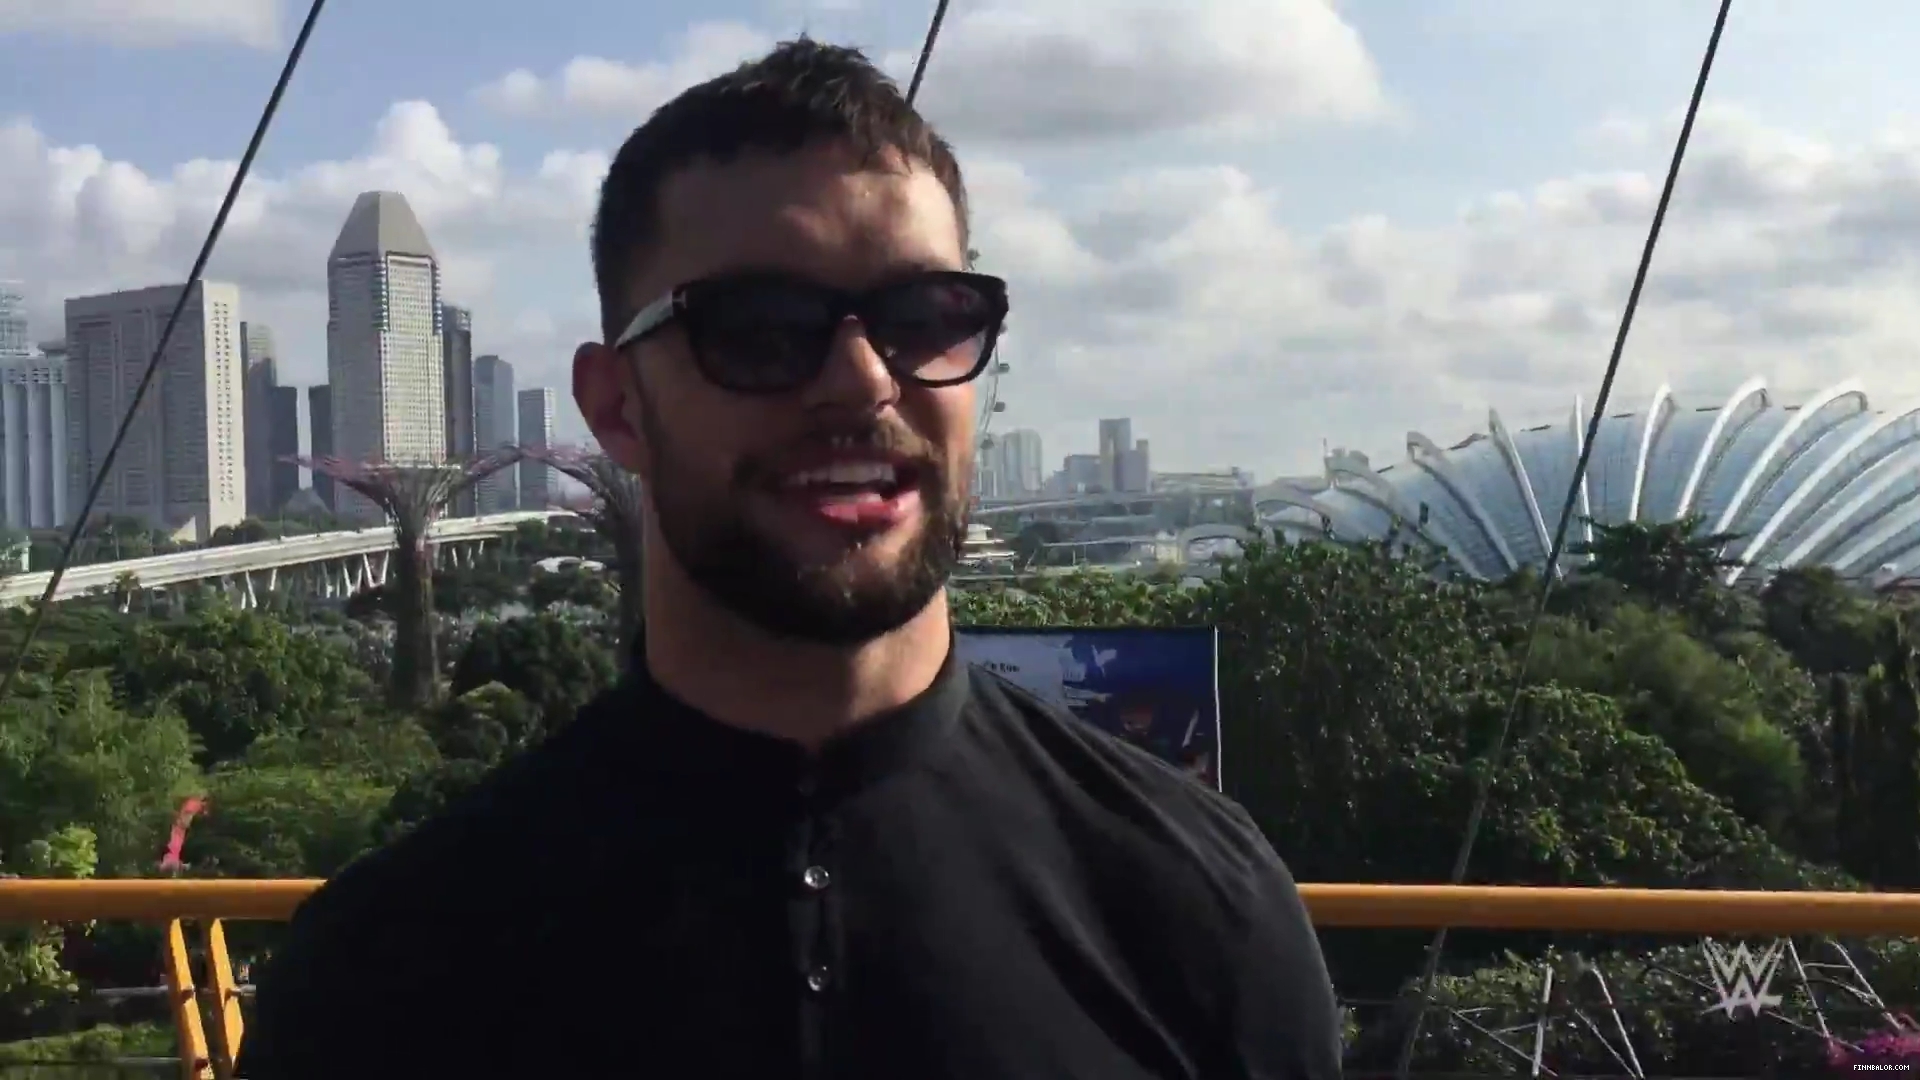 Finn_Balor_feels_like_he_is_in__Star_Wars__while_touring_Singapore_s_Supertree__mp40036.jpg